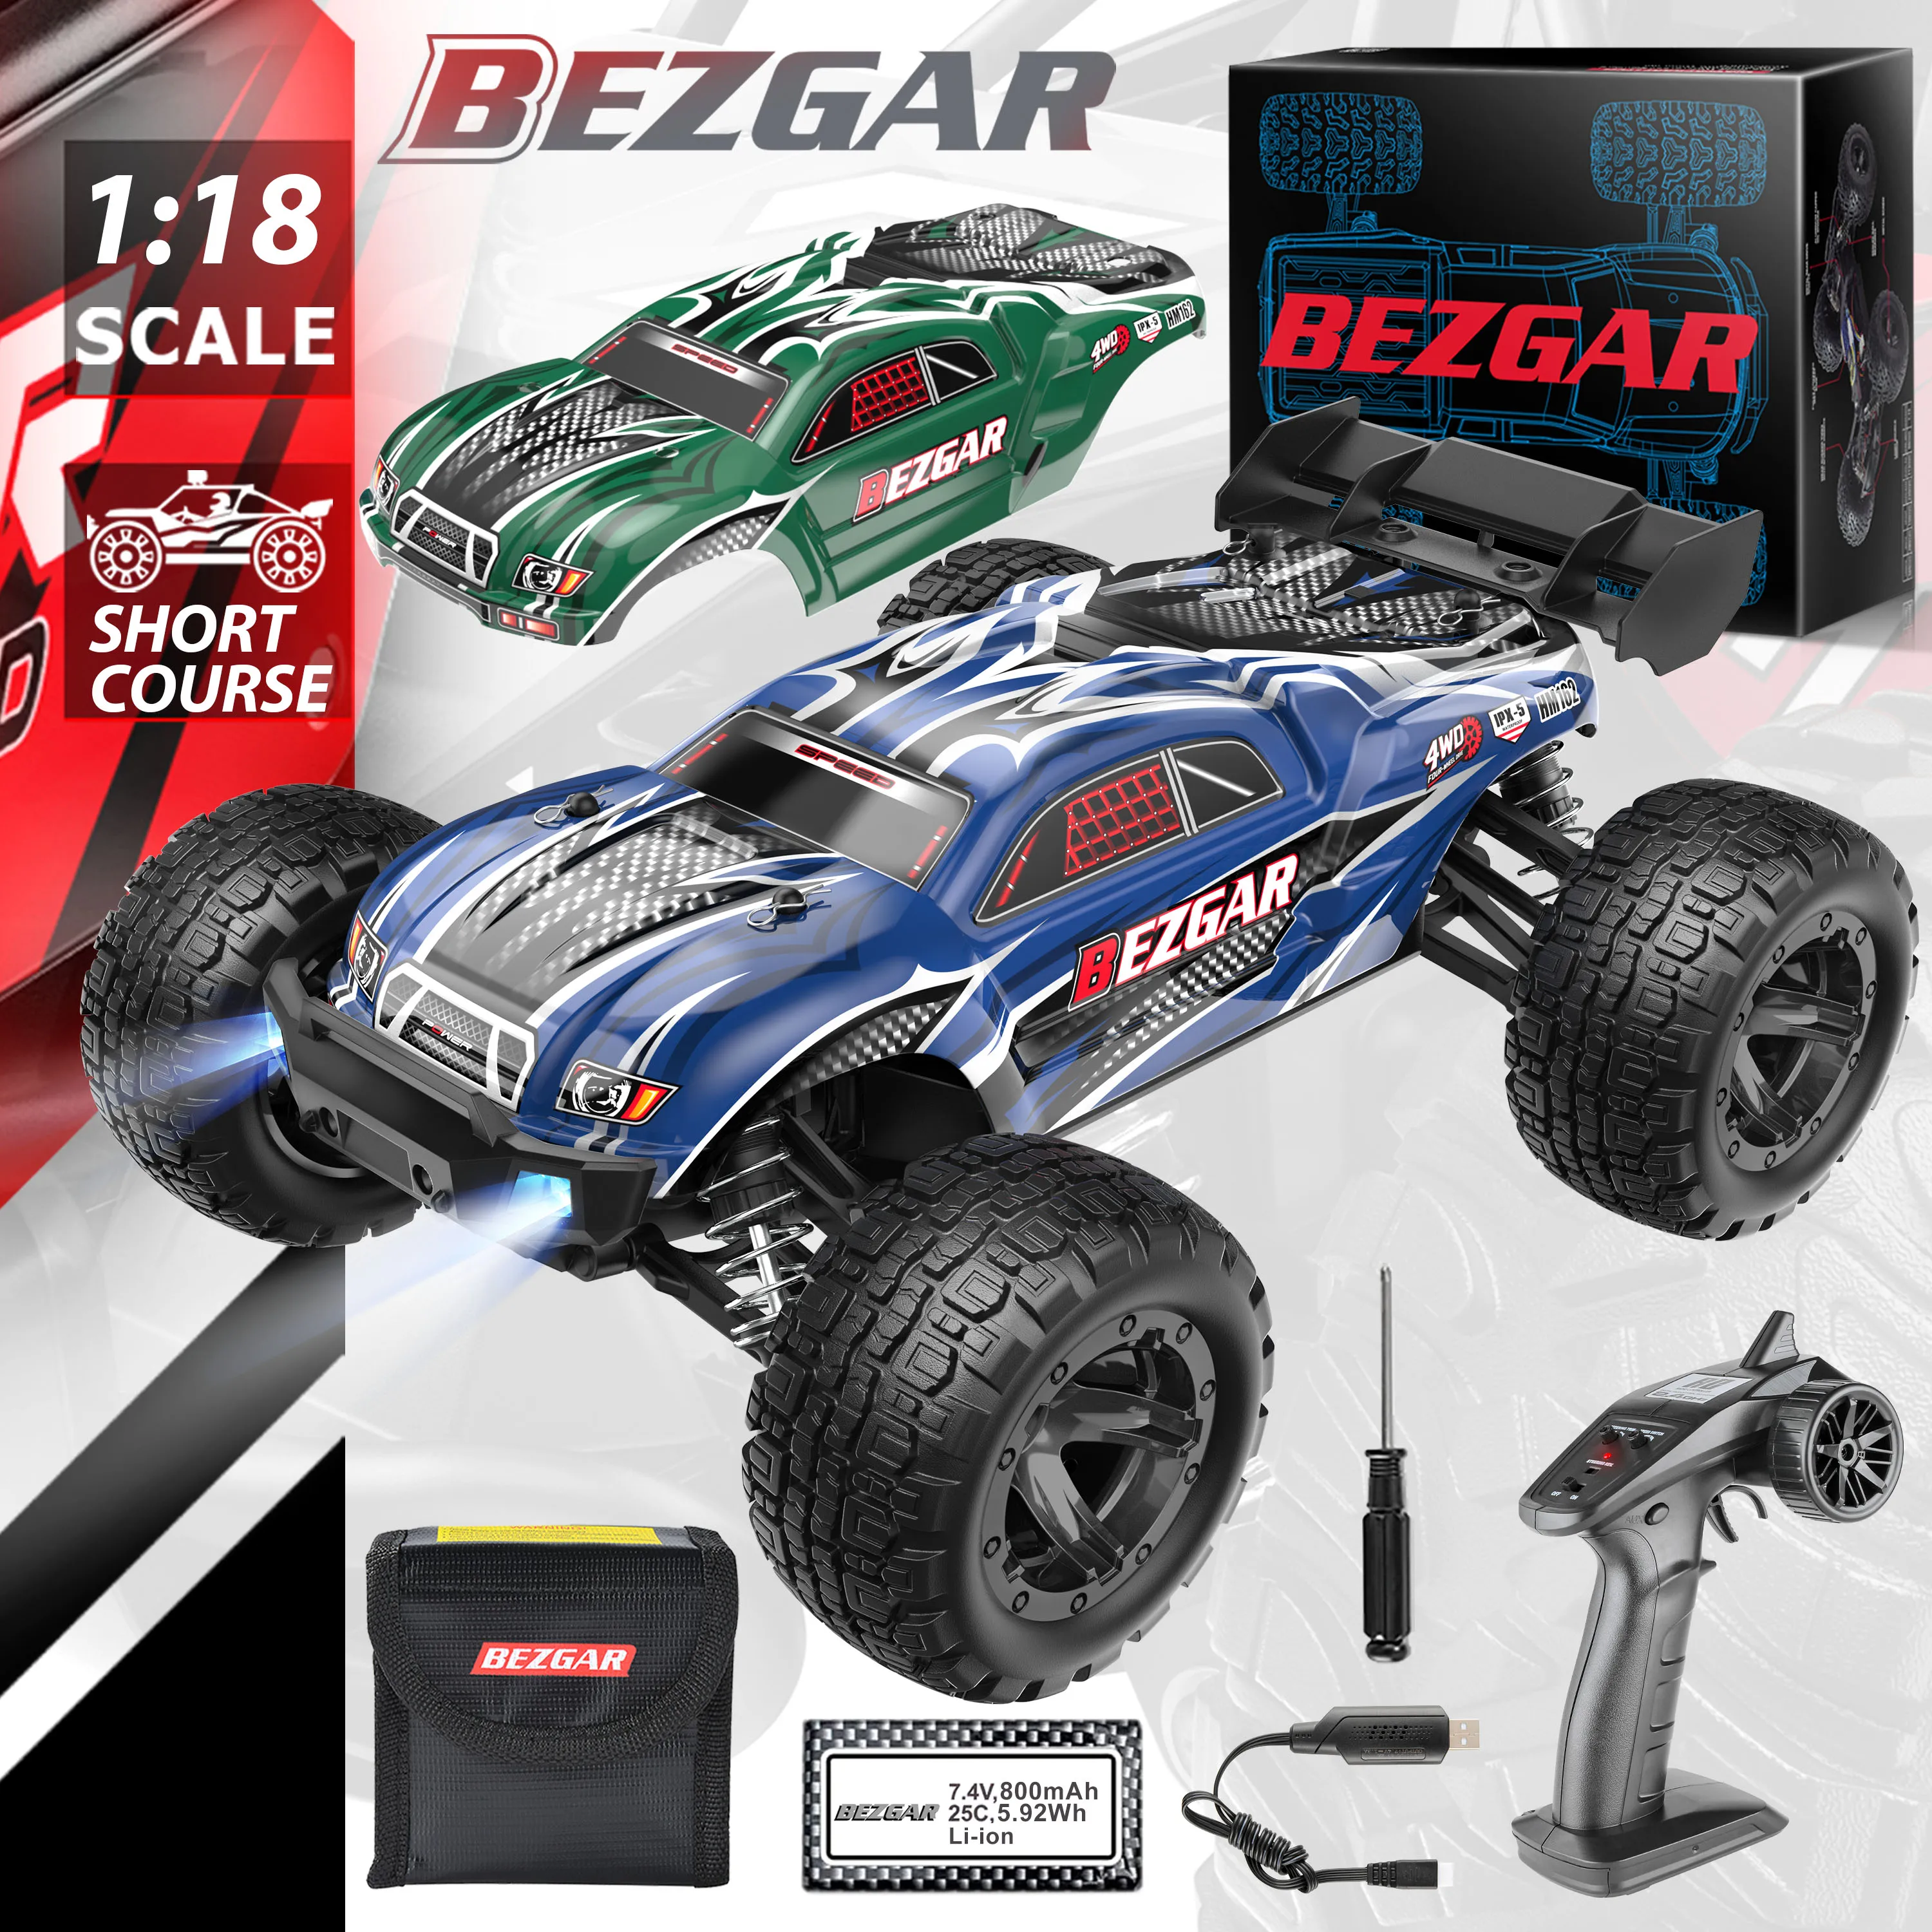 

BEZGAR HM162 Hobby RC Car 1:16 All-Terrain 40Km/h Off-Road 4WD Remote Control Monster Truck Crawler with Battery for Kids Adults